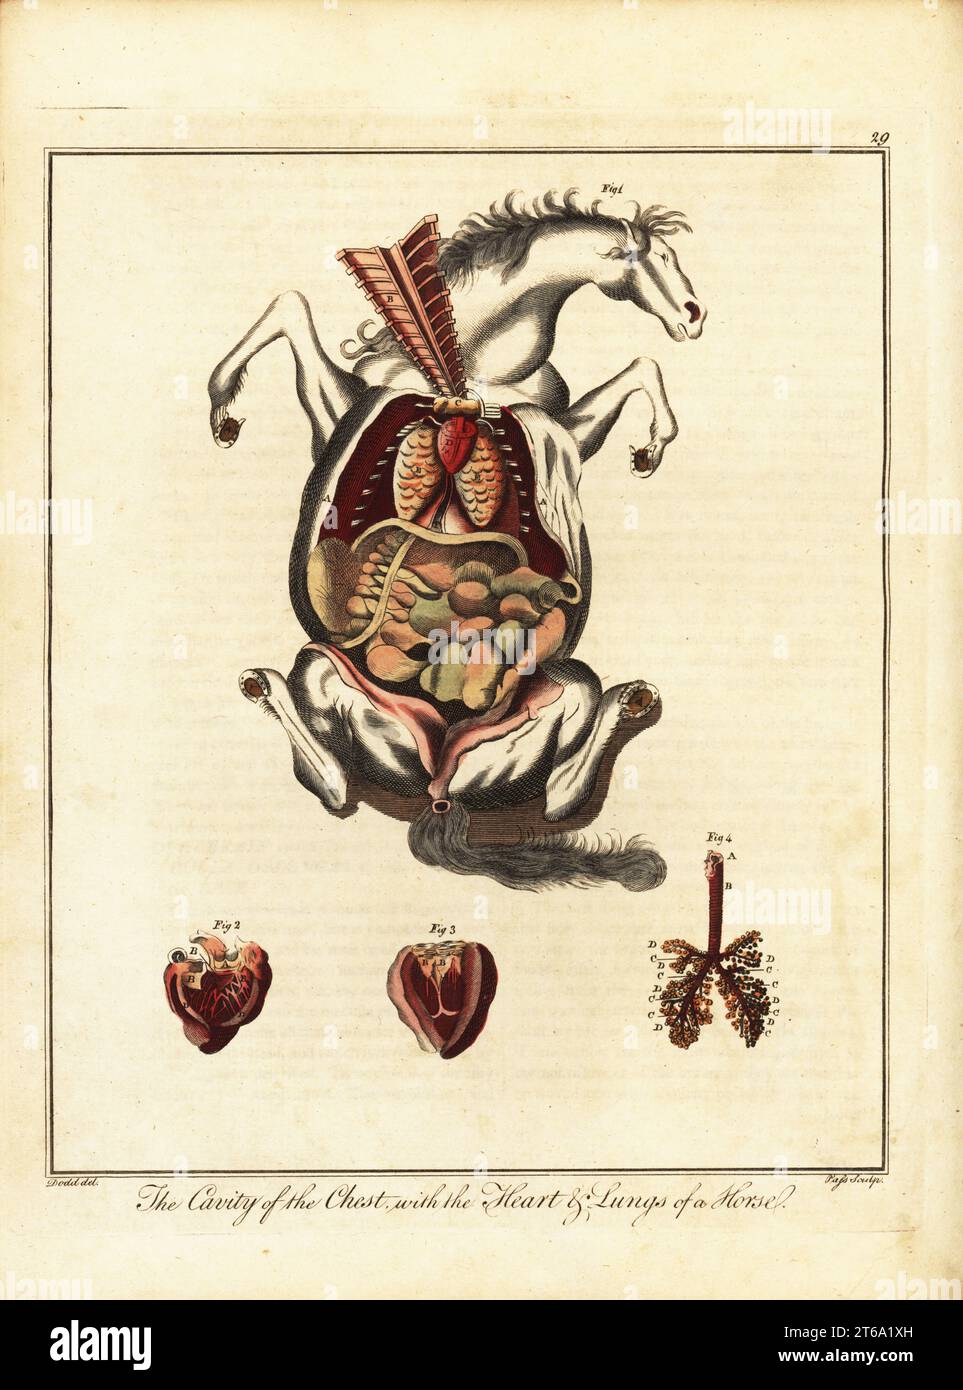 Anatomy of a horse. Chest cavity exposed 1, heart or vena cava 2, left ventricle 3, and lungs 4.. Handcoloured copperplate engraving by J. Pass after an illustration by Daniel Dodd from William Augustus Osbaldistons The British Sportsman, or Nobleman, Gentleman and Farmers Dictionary of Recreation and Amusement, J. Stead, London, 1792. Stock Photo